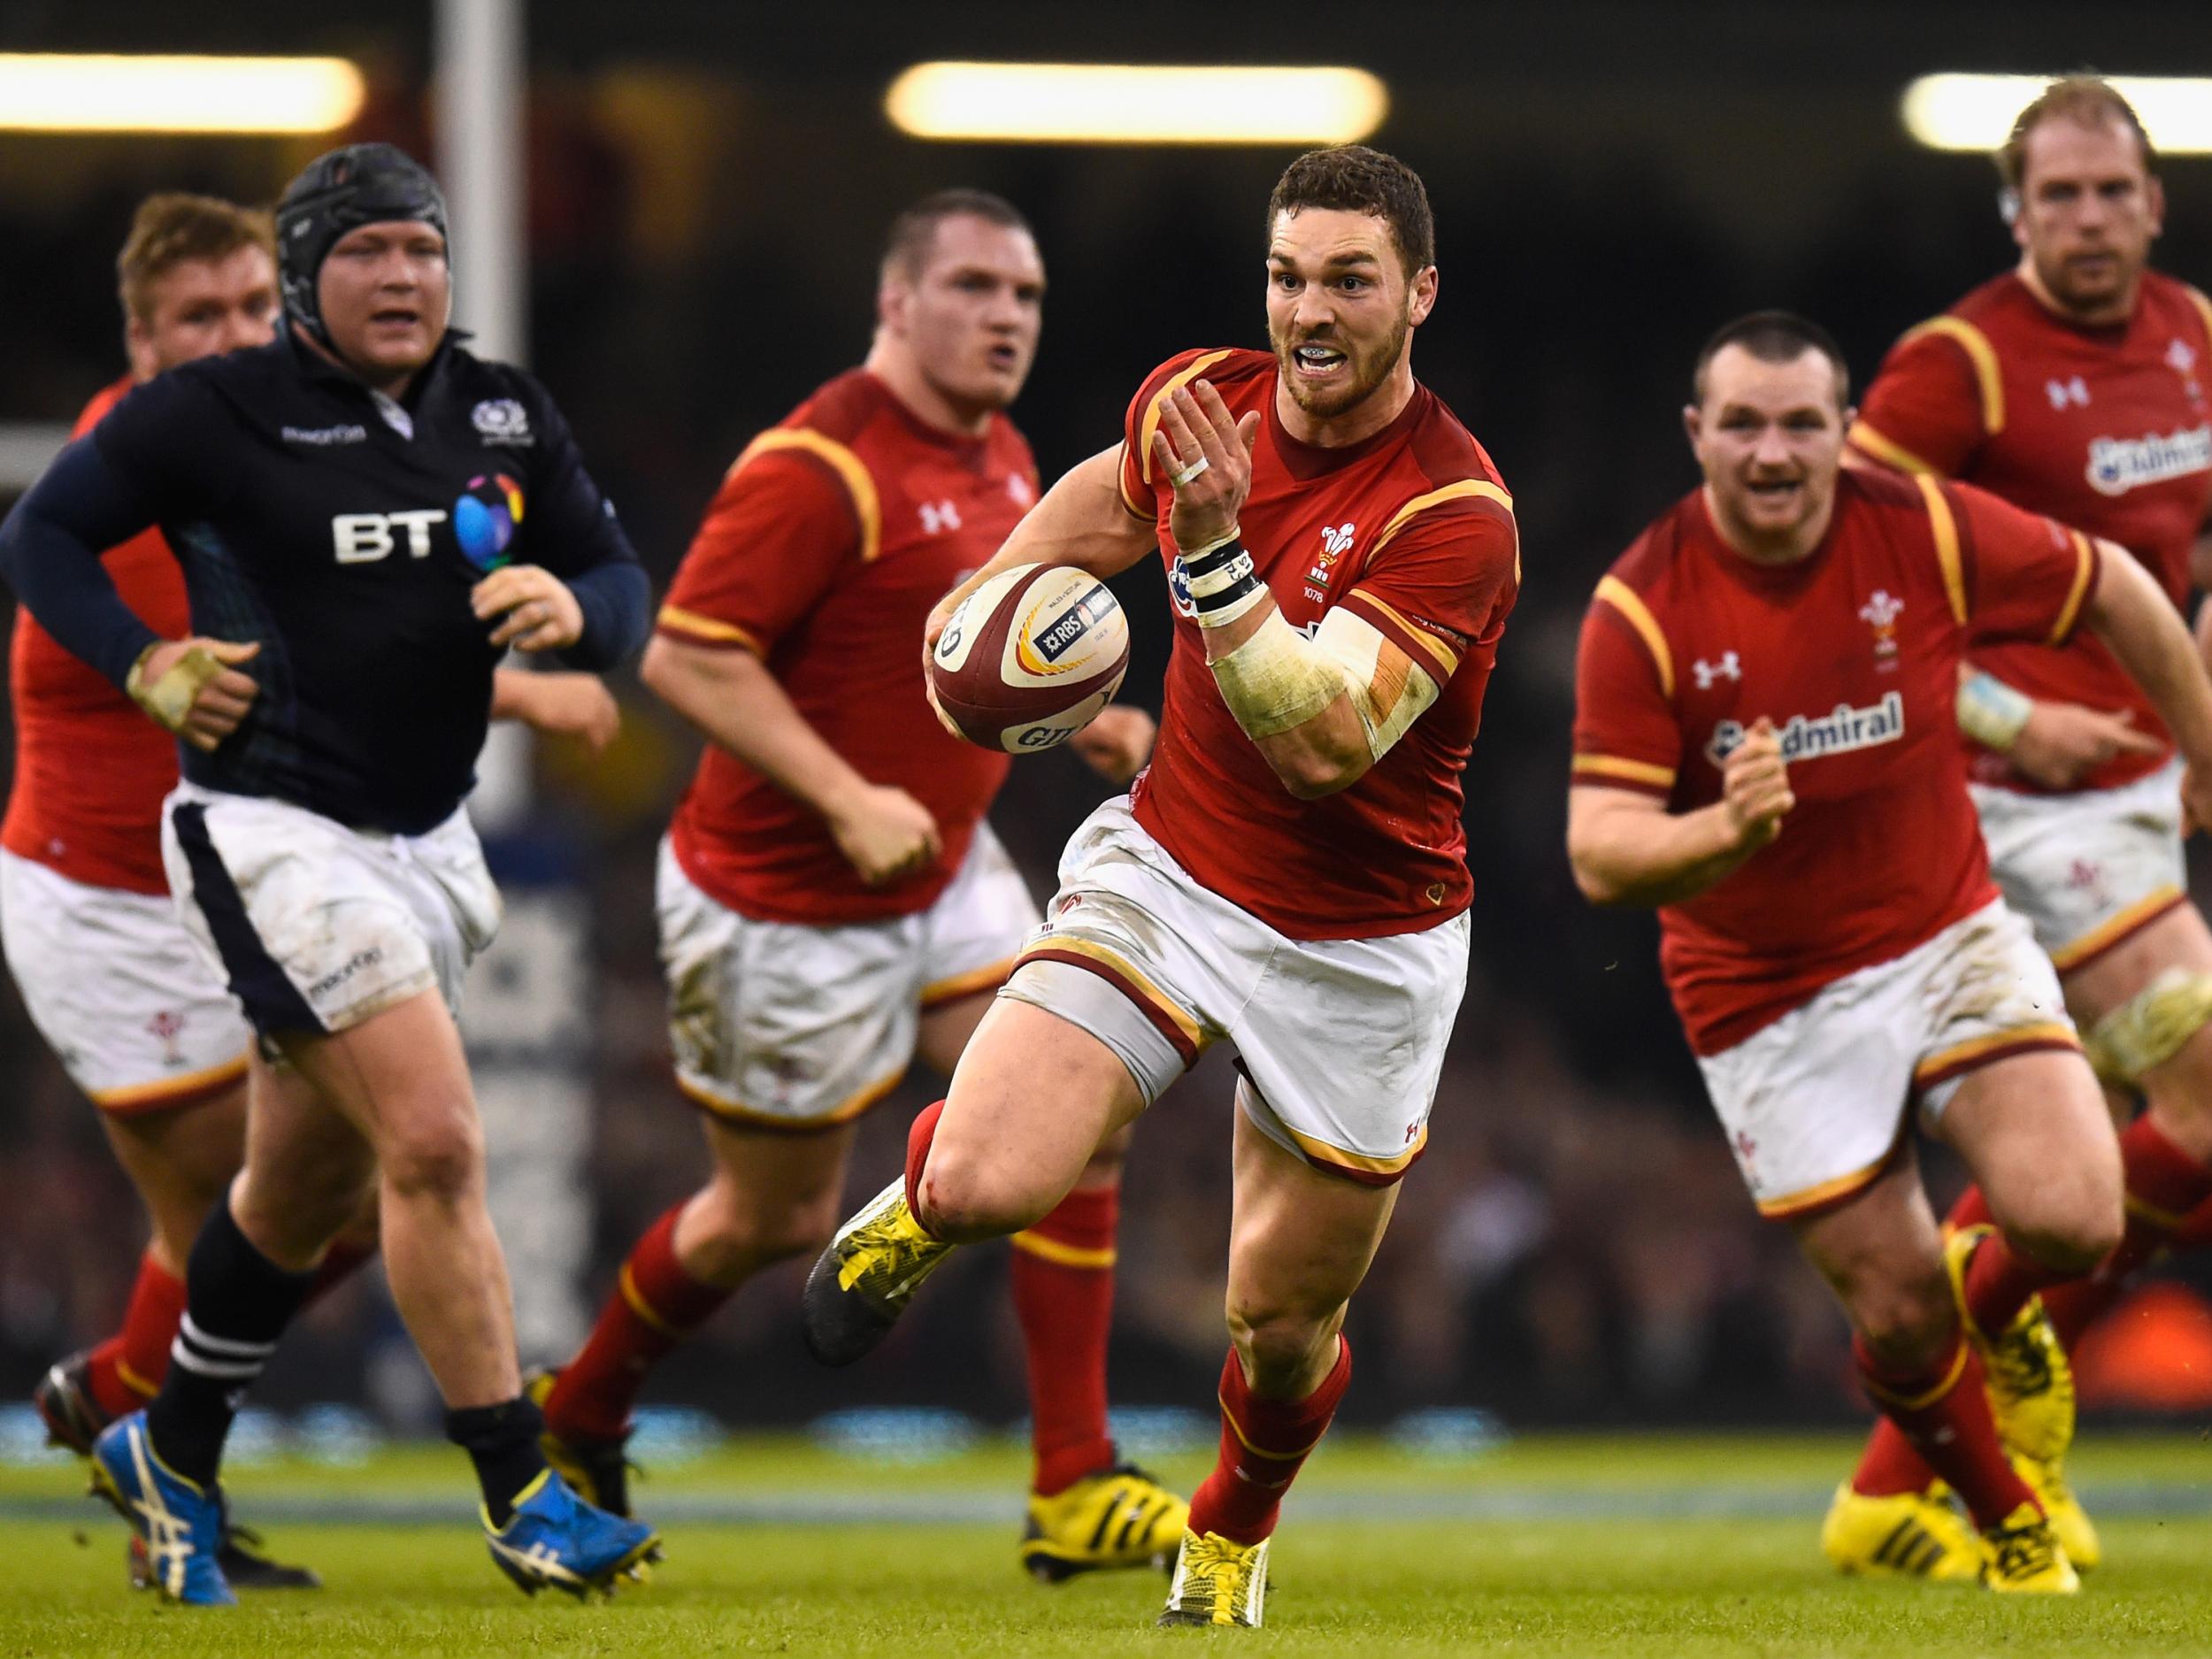 George North was the top try scorer last year but has struggled since